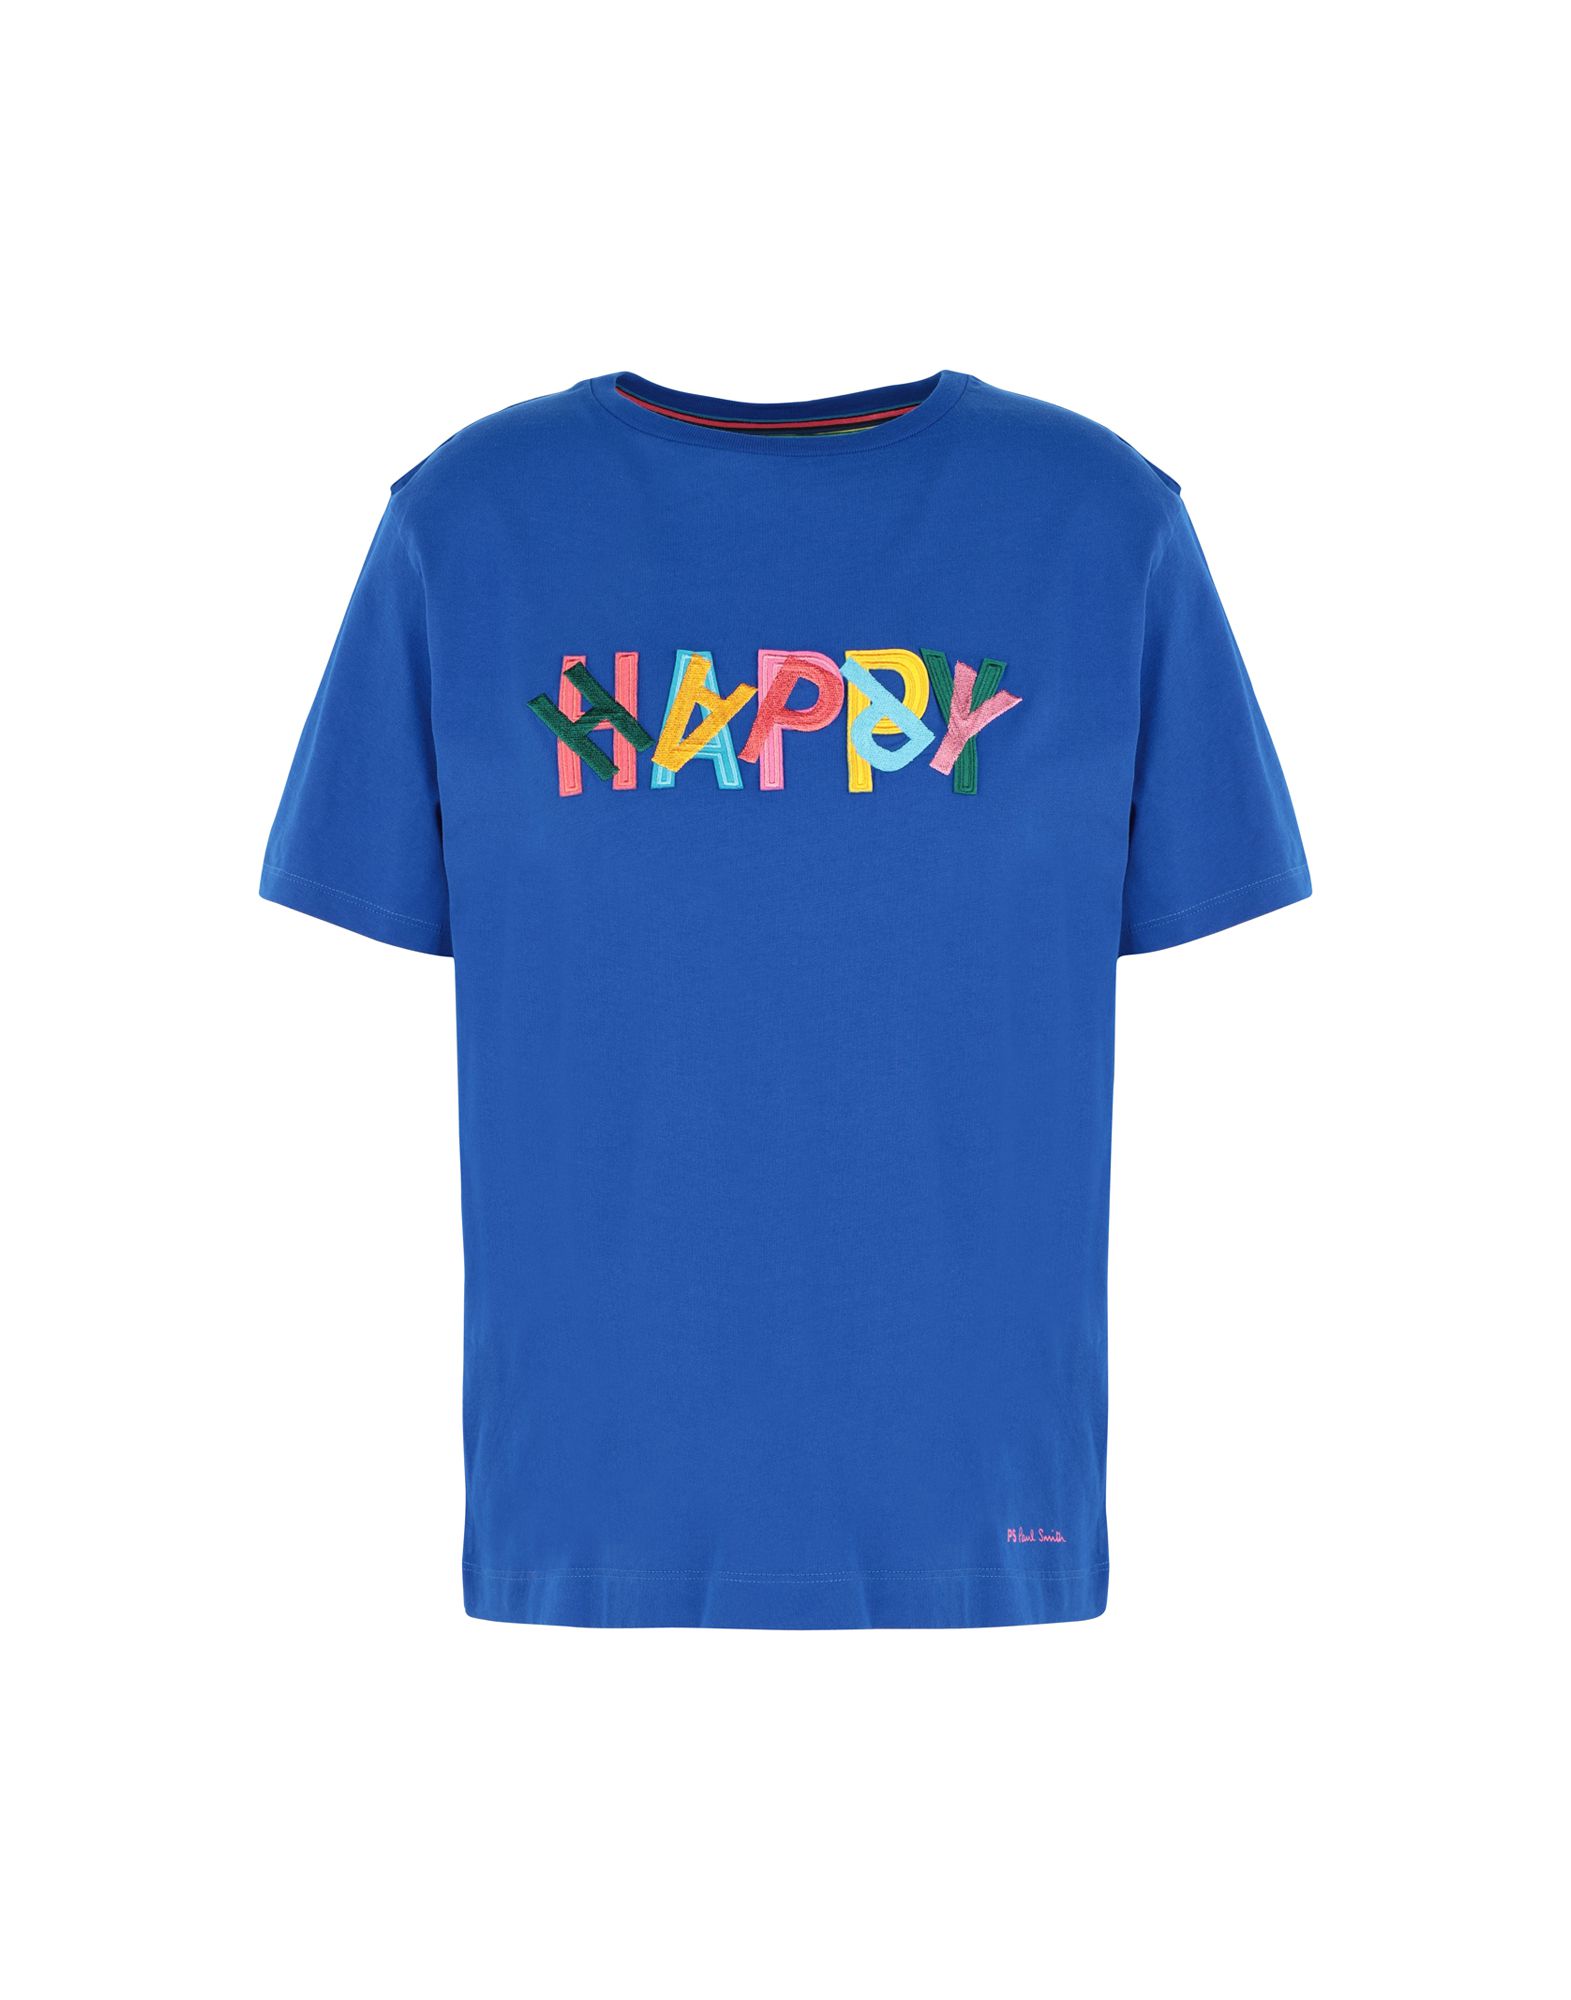 PS BY PAUL SMITH T-SHIRTS,12318118KK 3